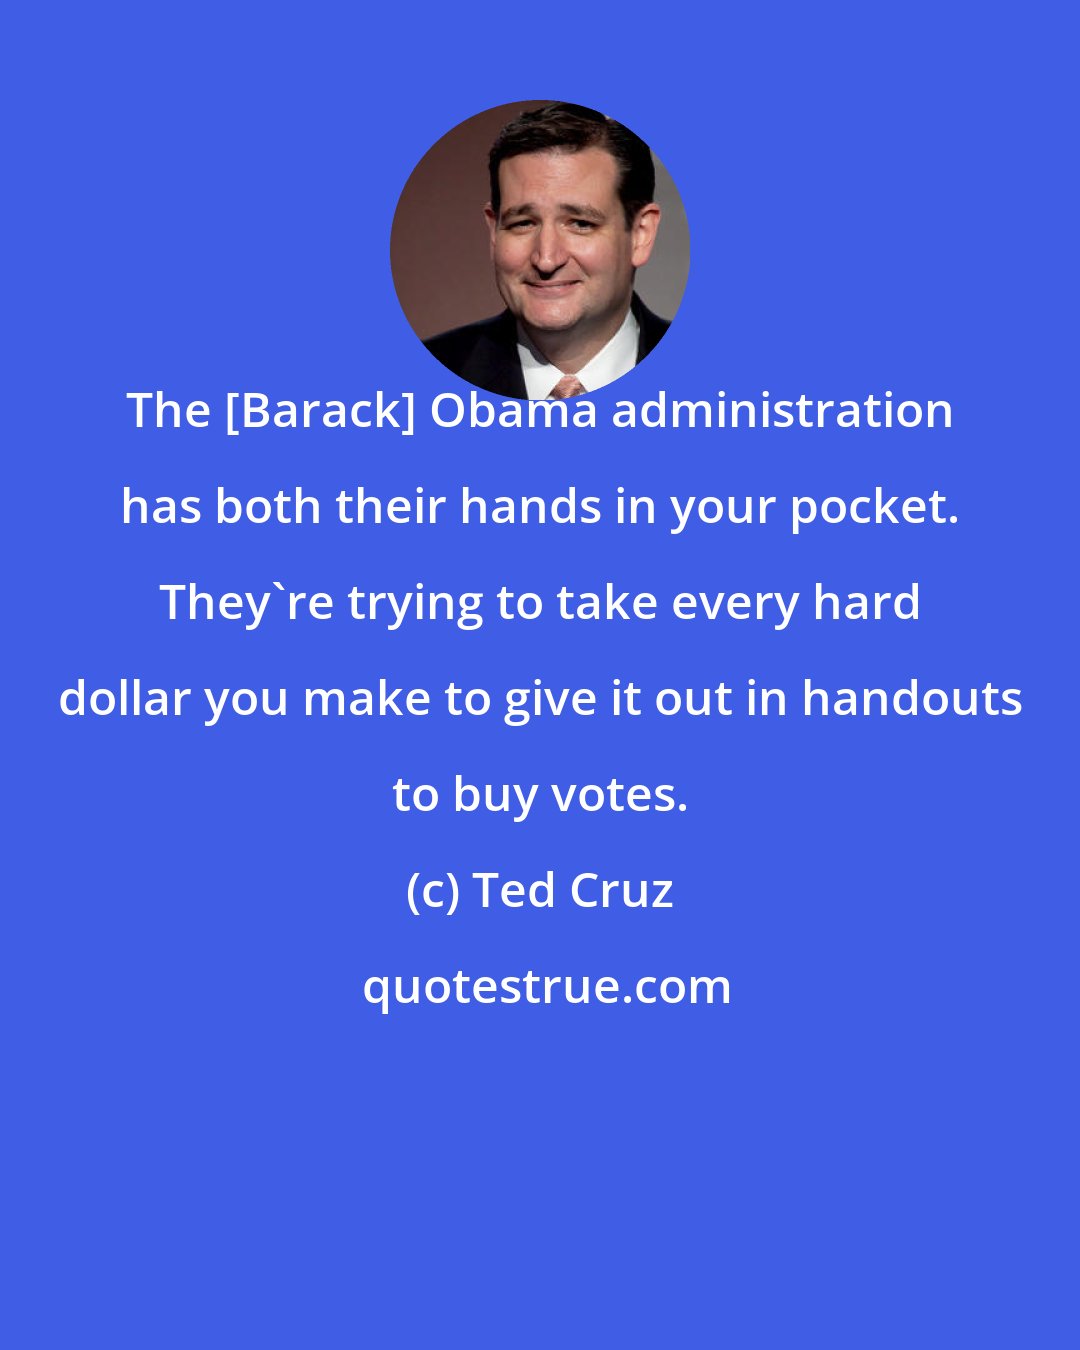 Ted Cruz: The [Barack] Obama administration has both their hands in your pocket. They're trying to take every hard dollar you make to give it out in handouts to buy votes.